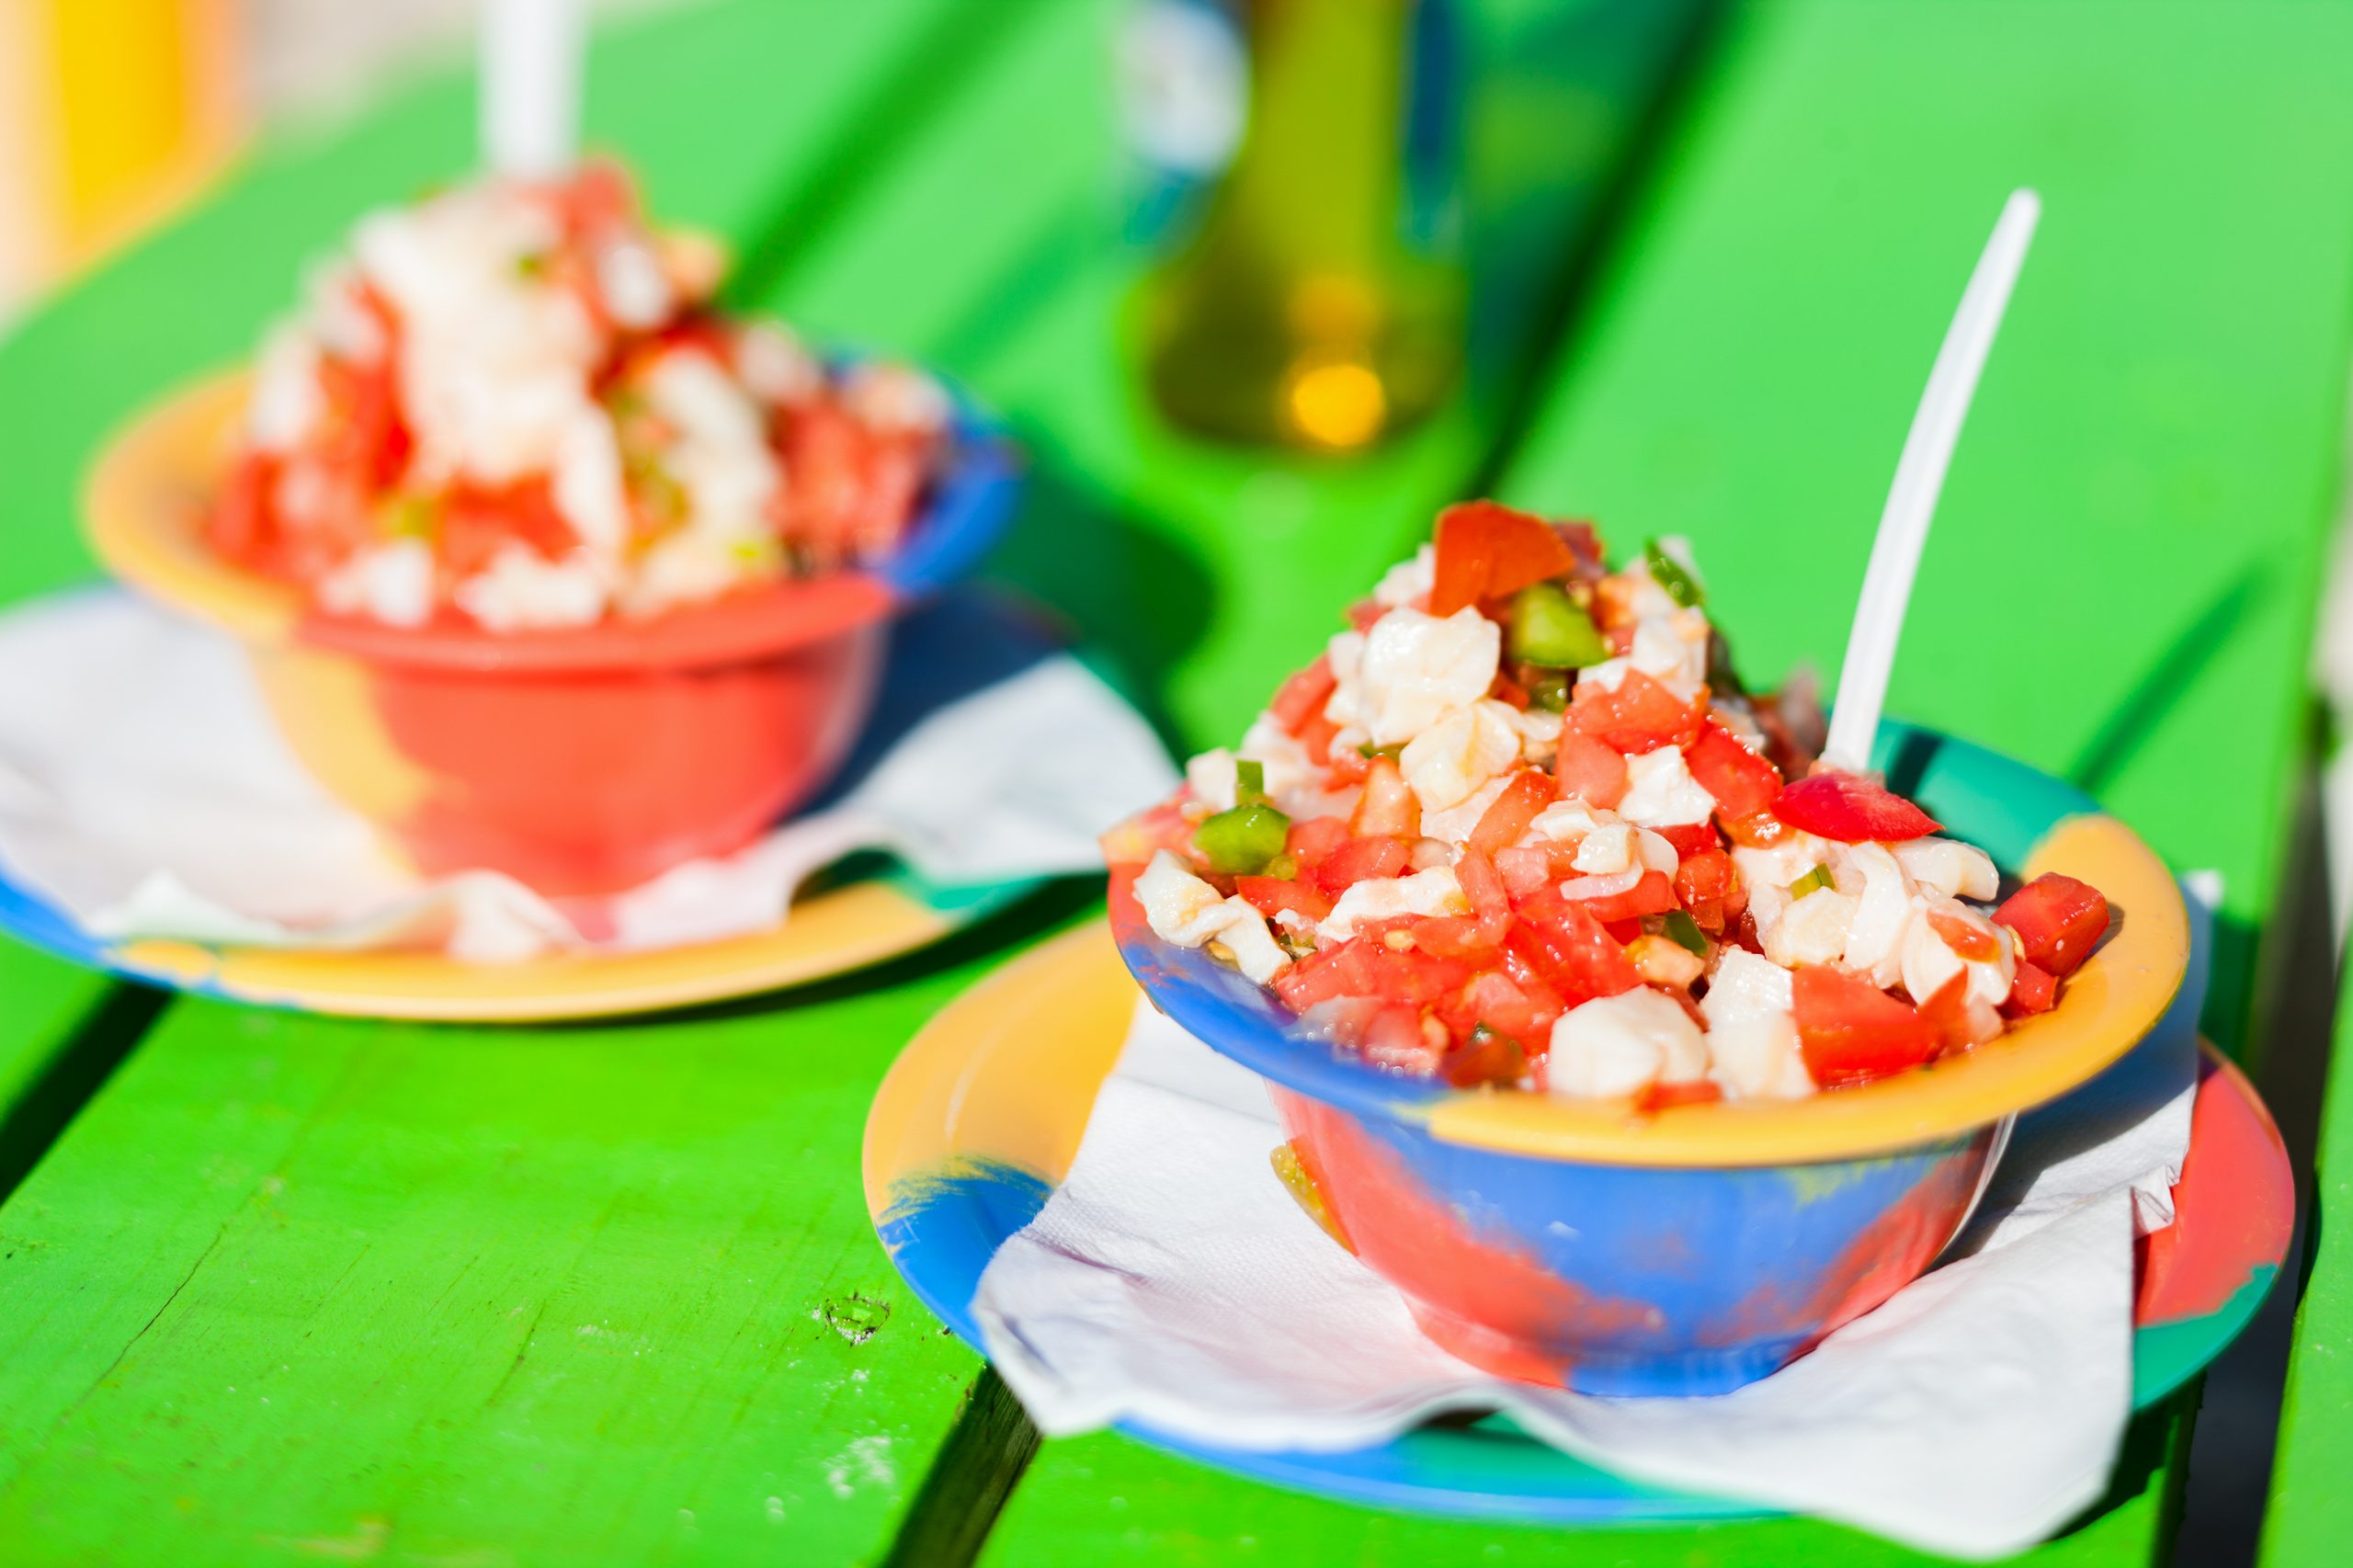 Best Conch Shacks and Restaurants in the Bahamas